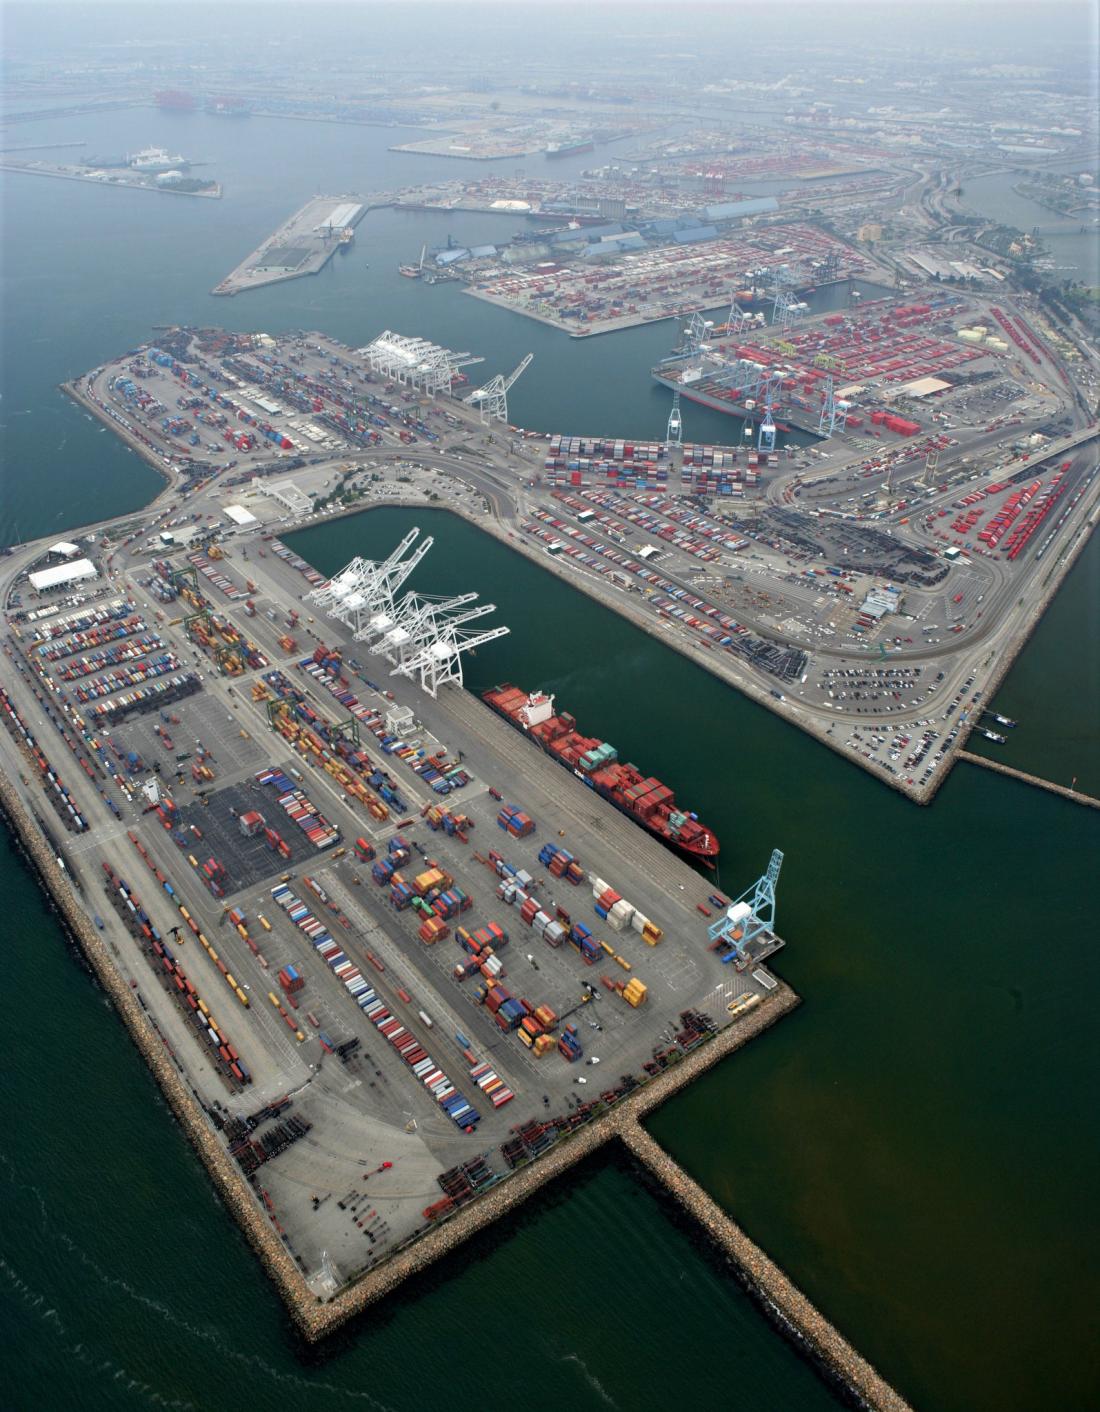 Aerial view of the Port of Long Beach, California, container port